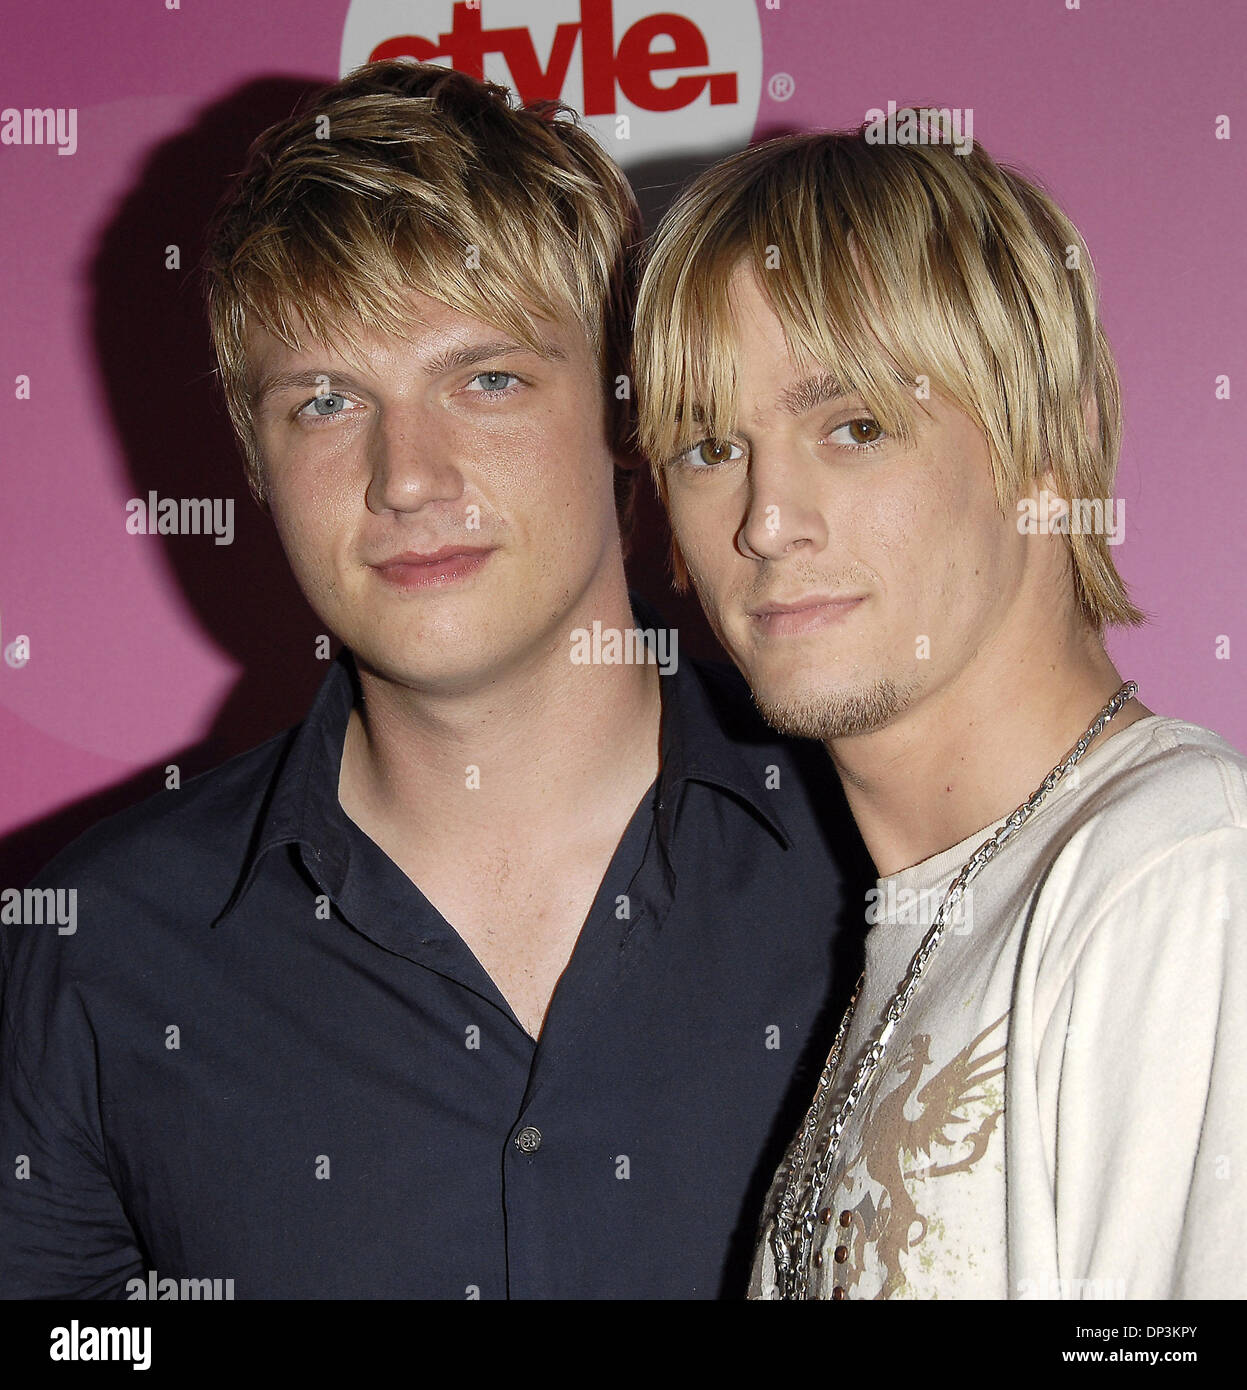 July 11, 2006; Pasadena, CA, USA; Musicians NICK CARTER (L) and AARON CARTER at the Style Network Party as part of the 2006 TCA Summer Press Tour. Mandatory Credit: Photo by Vaughn Youtz. (©) Copyright 2006 by Vaughn Youtz. Stock Photo